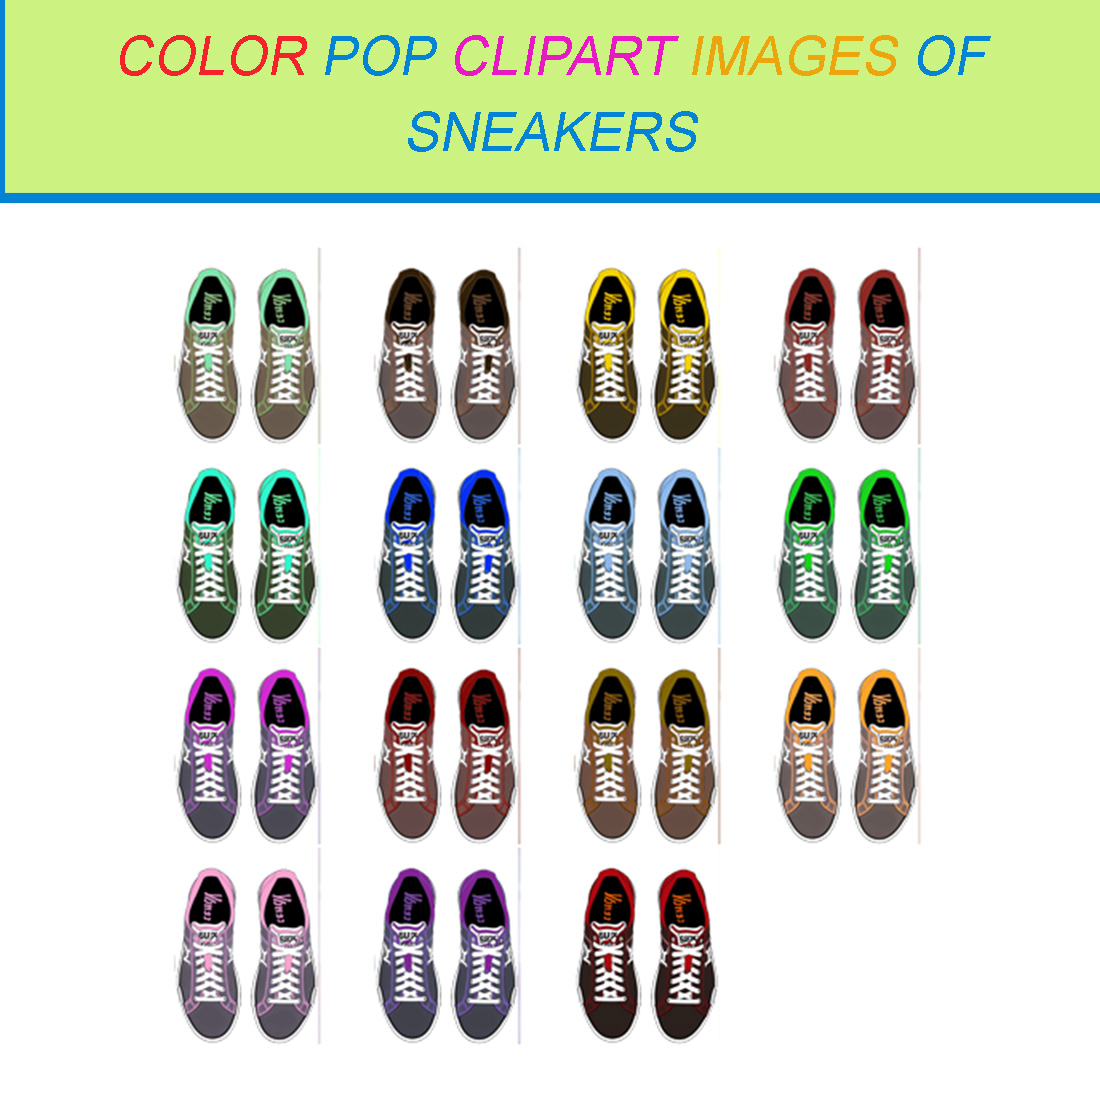 15 COLOR POP CLIPART IMAGES OF SNEAKERS cover image.